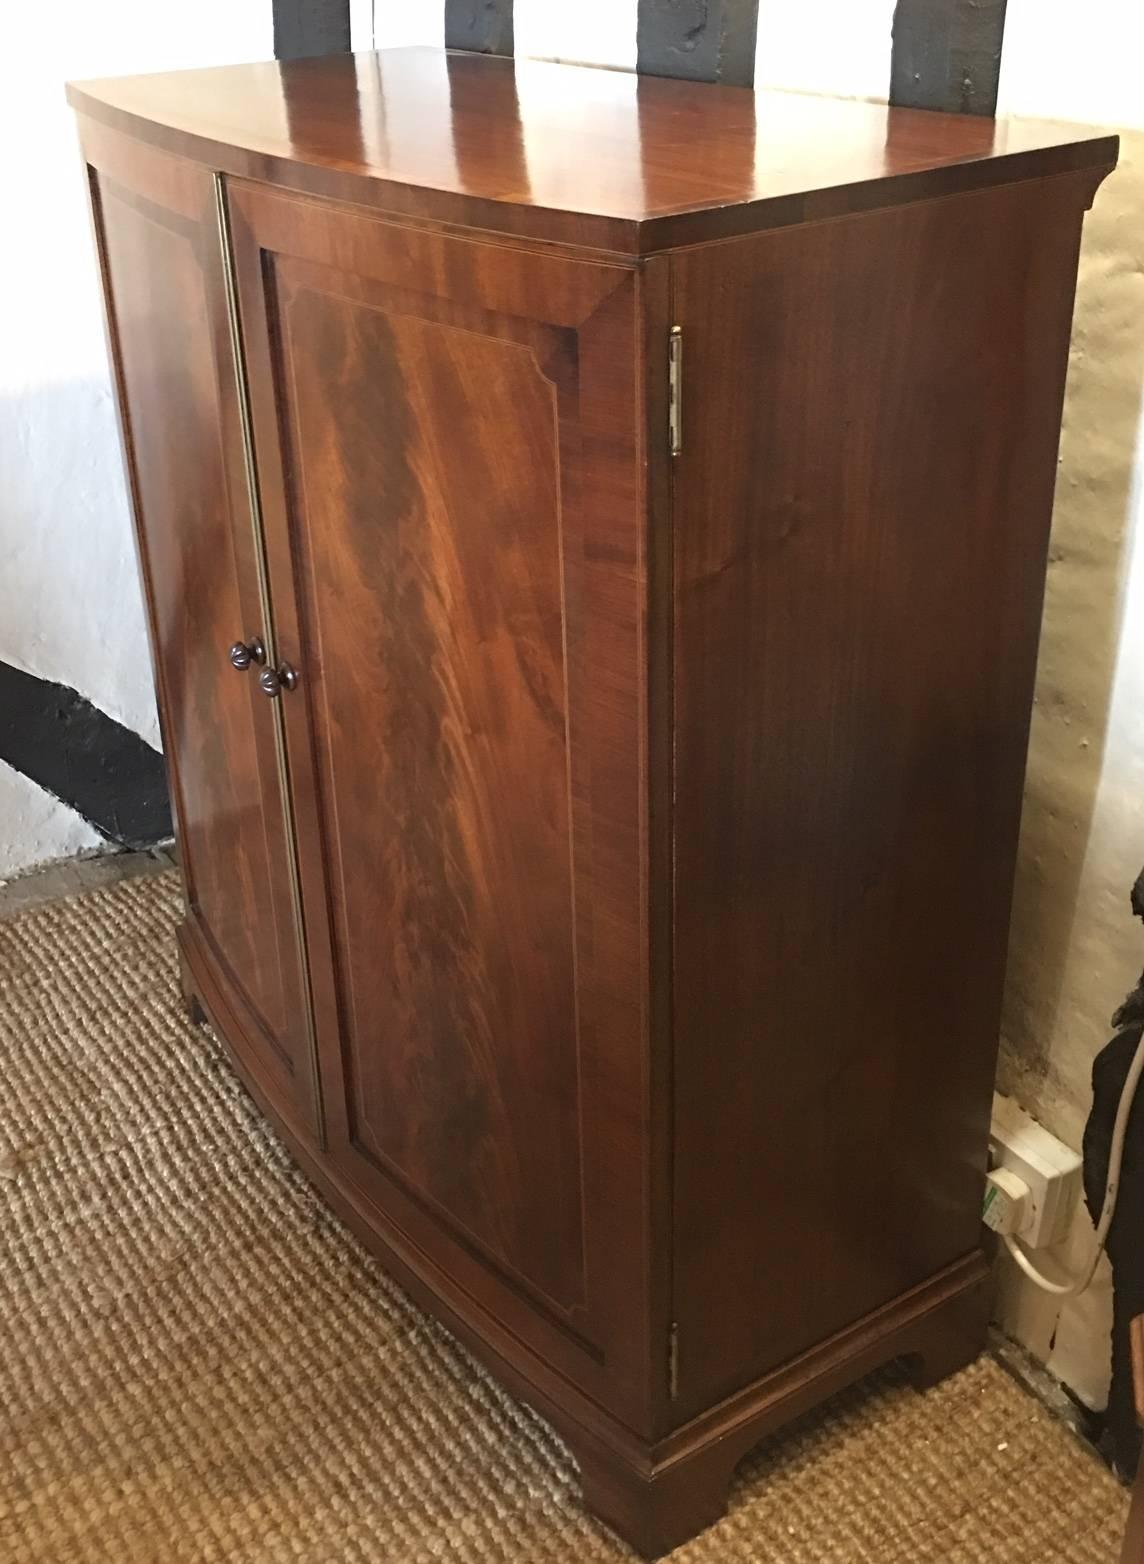 An Edwardian flame mahogany and inlaid bow front cabinet, circa 1900
Opening to reveal a shelved interior, raised on bracket feet.
Measure: (H 106.5cm x D 44.5cm x W 91cm).
 